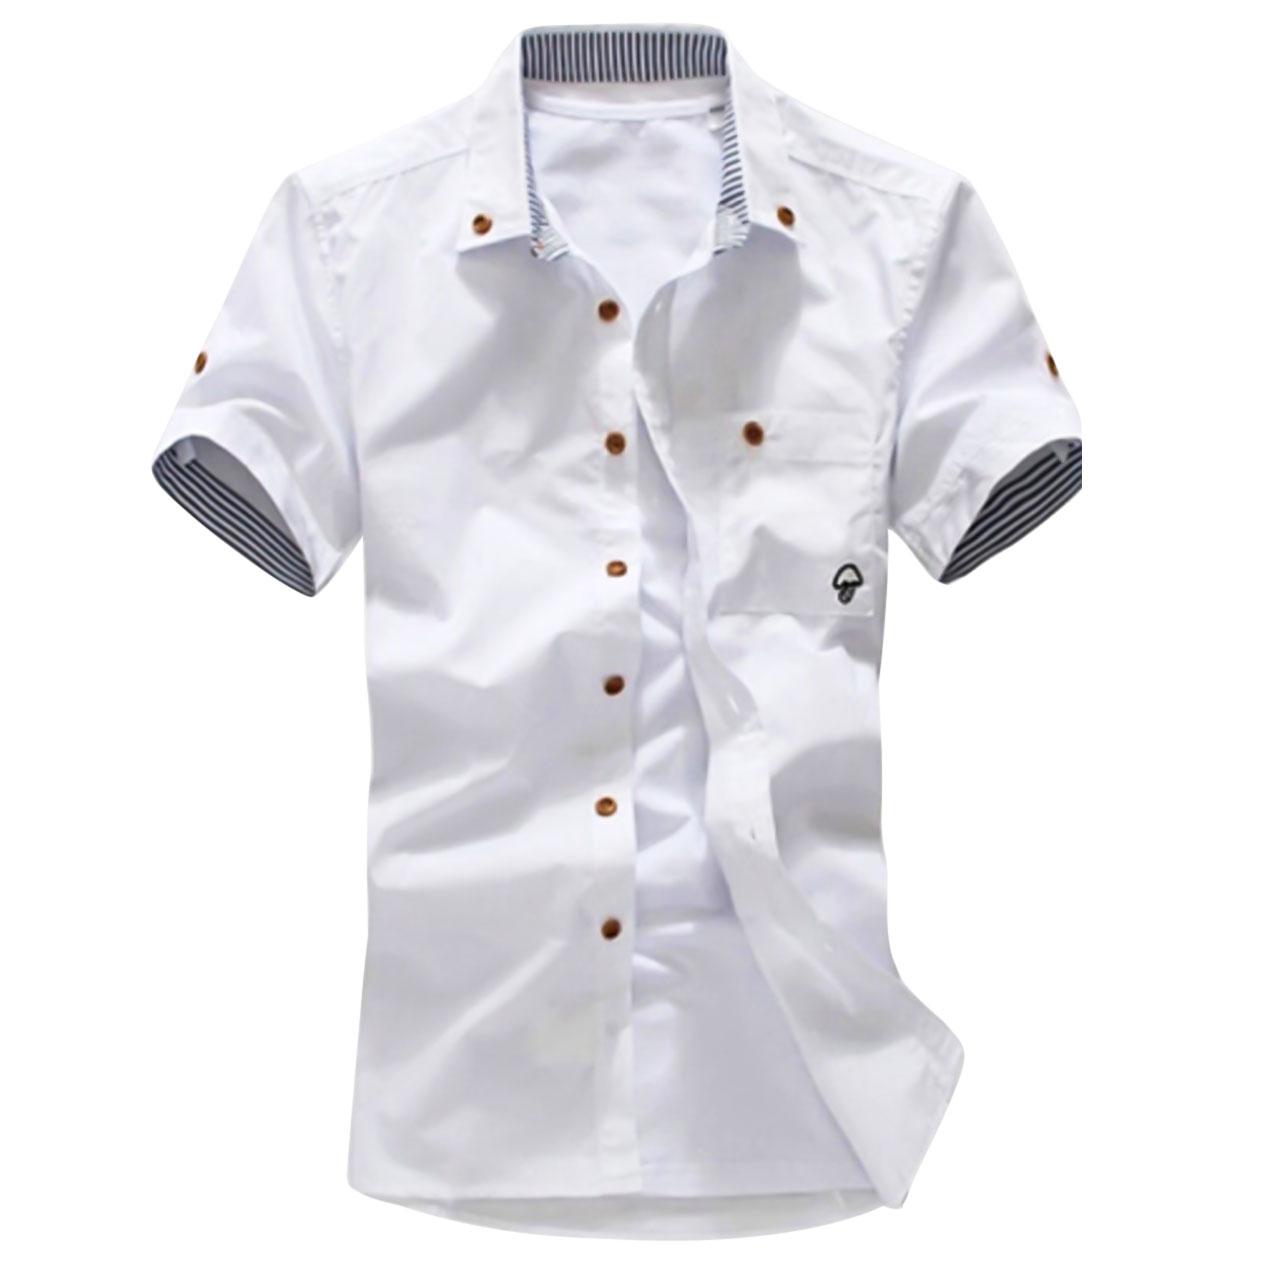 Men's Solid Colored Tops Plus Size White Button Down Shirt With Collar